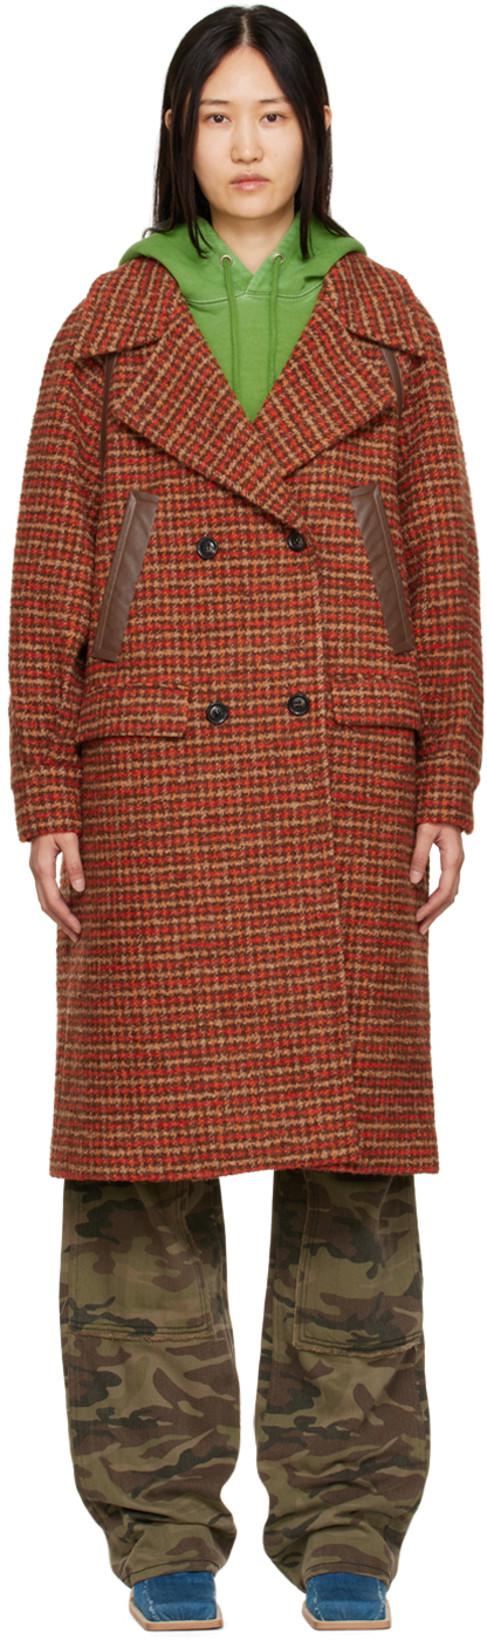 Orange & Brown New Prato Plaid Coat by ANDERSSON BELL